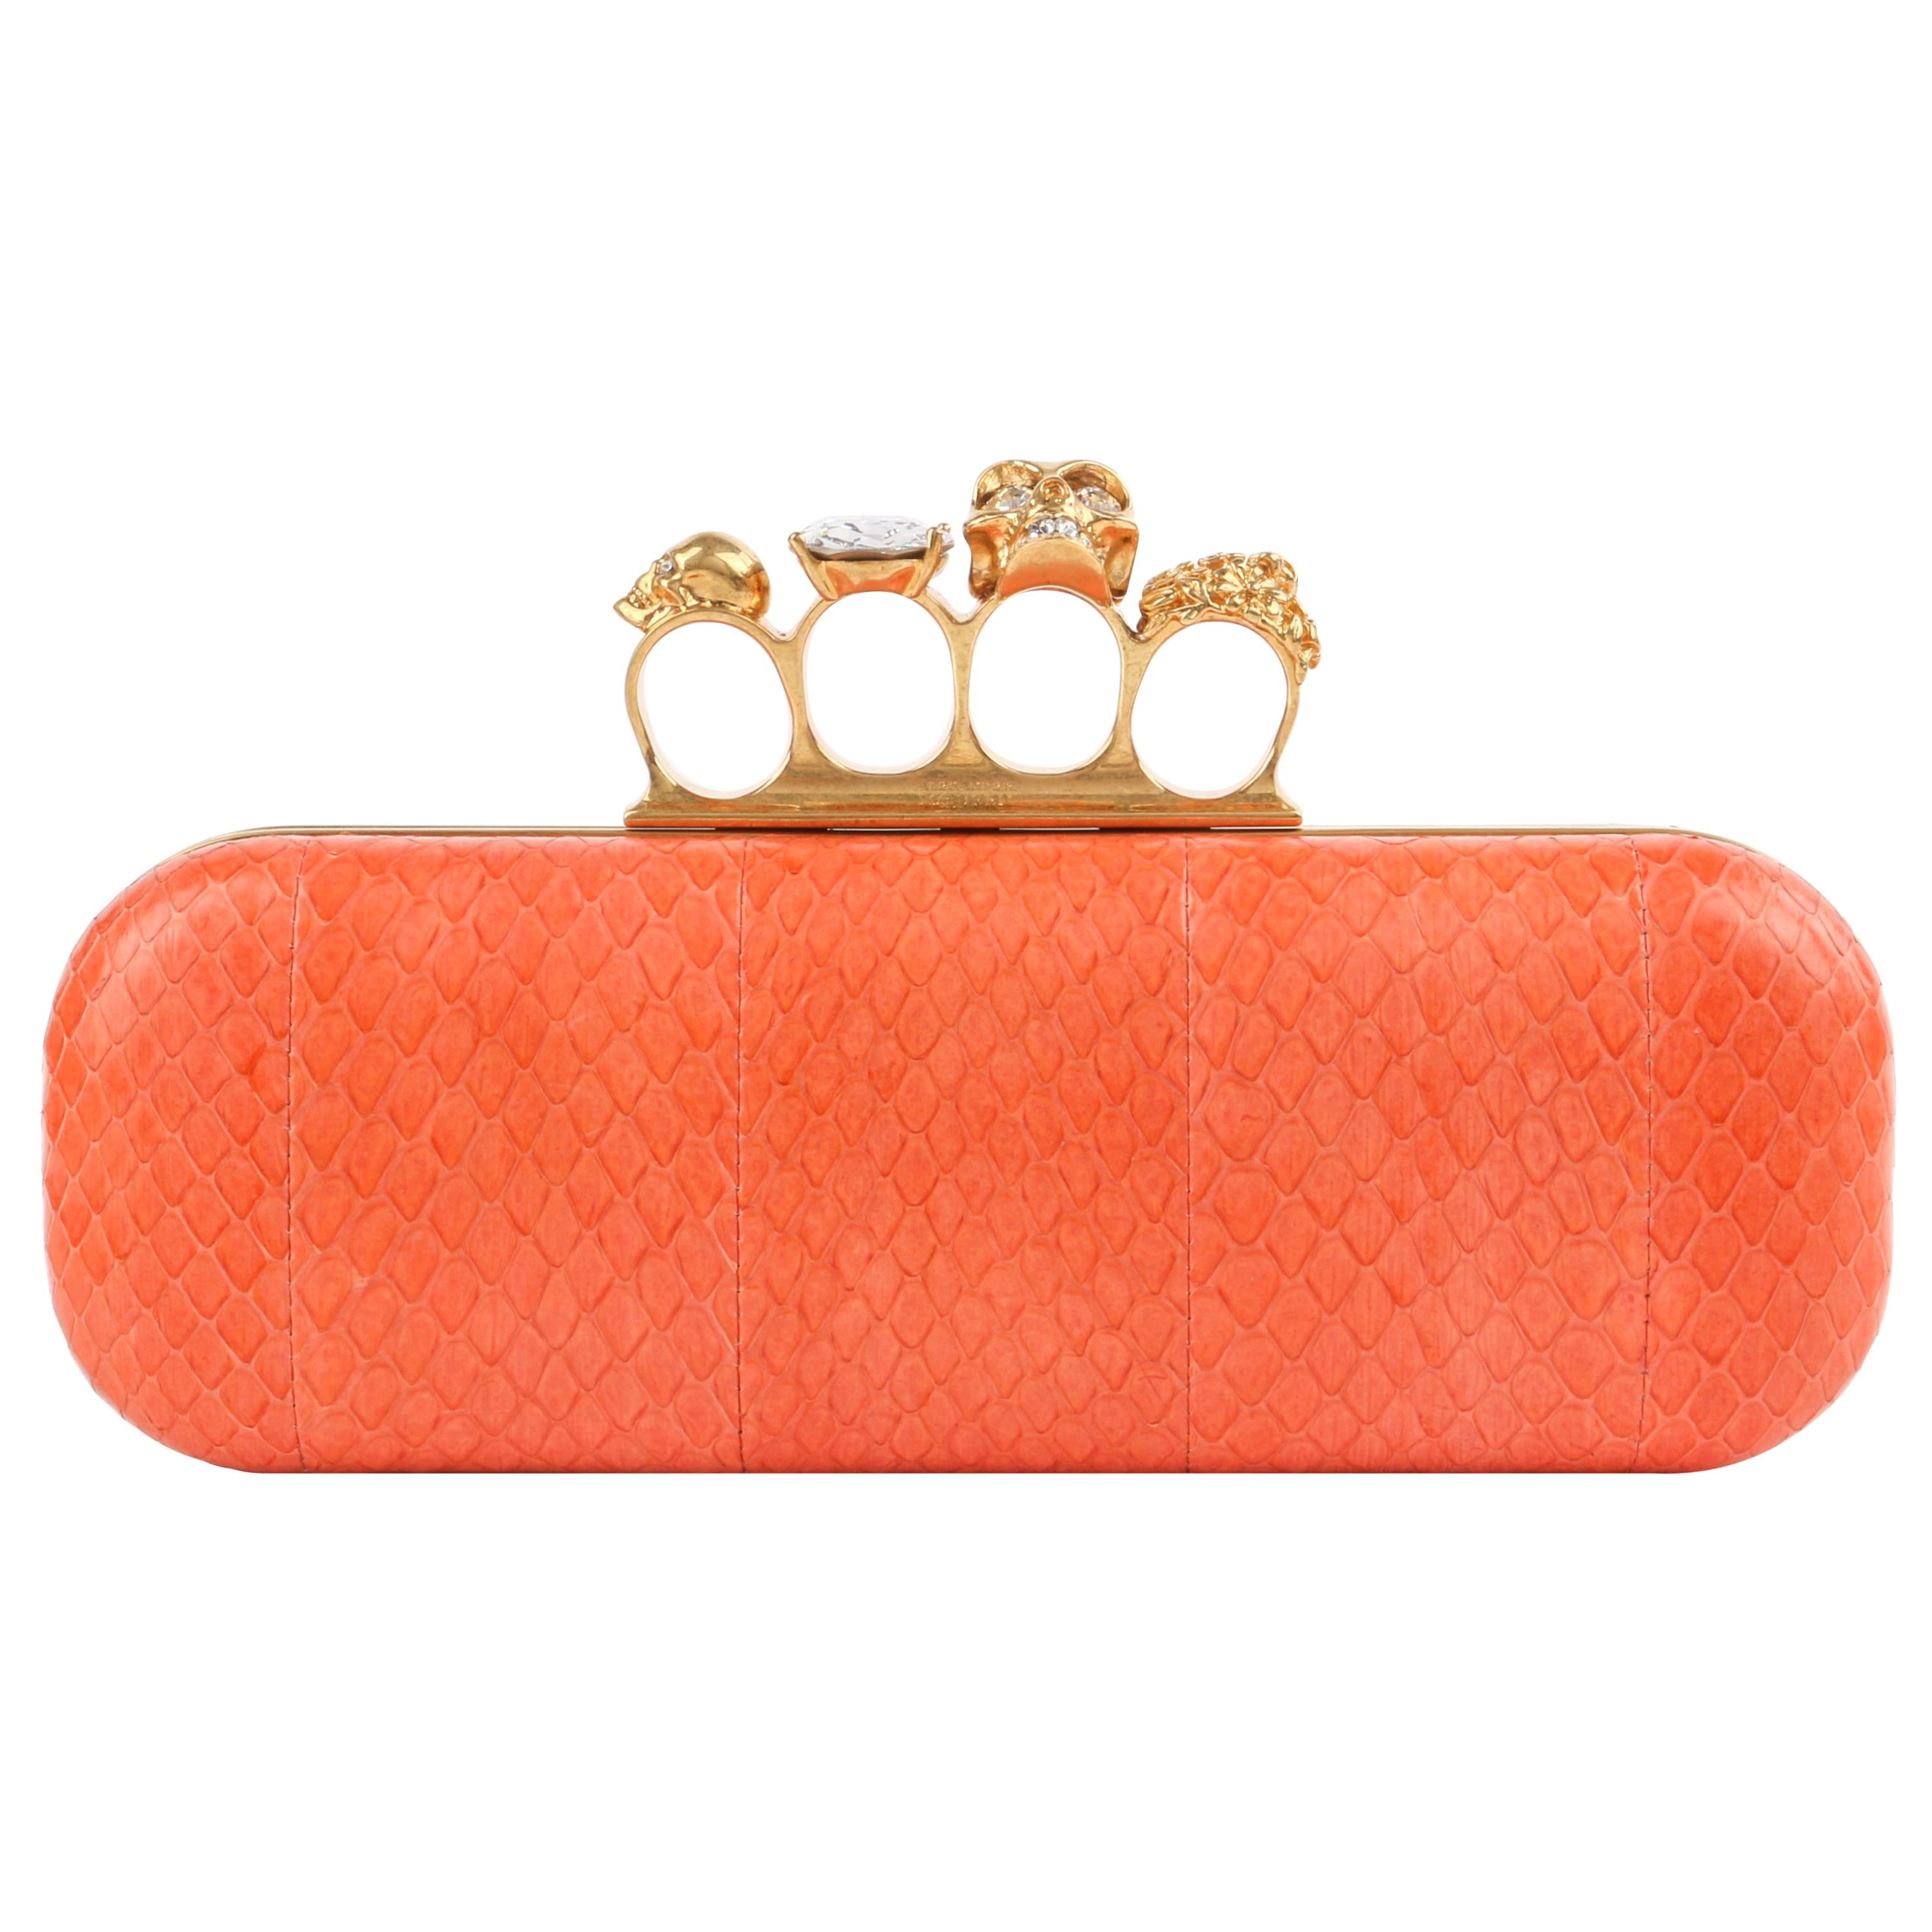 ALEXANDER McQUEEN Coral Python Skull Crystal Knuckle Duster Box Clutch 